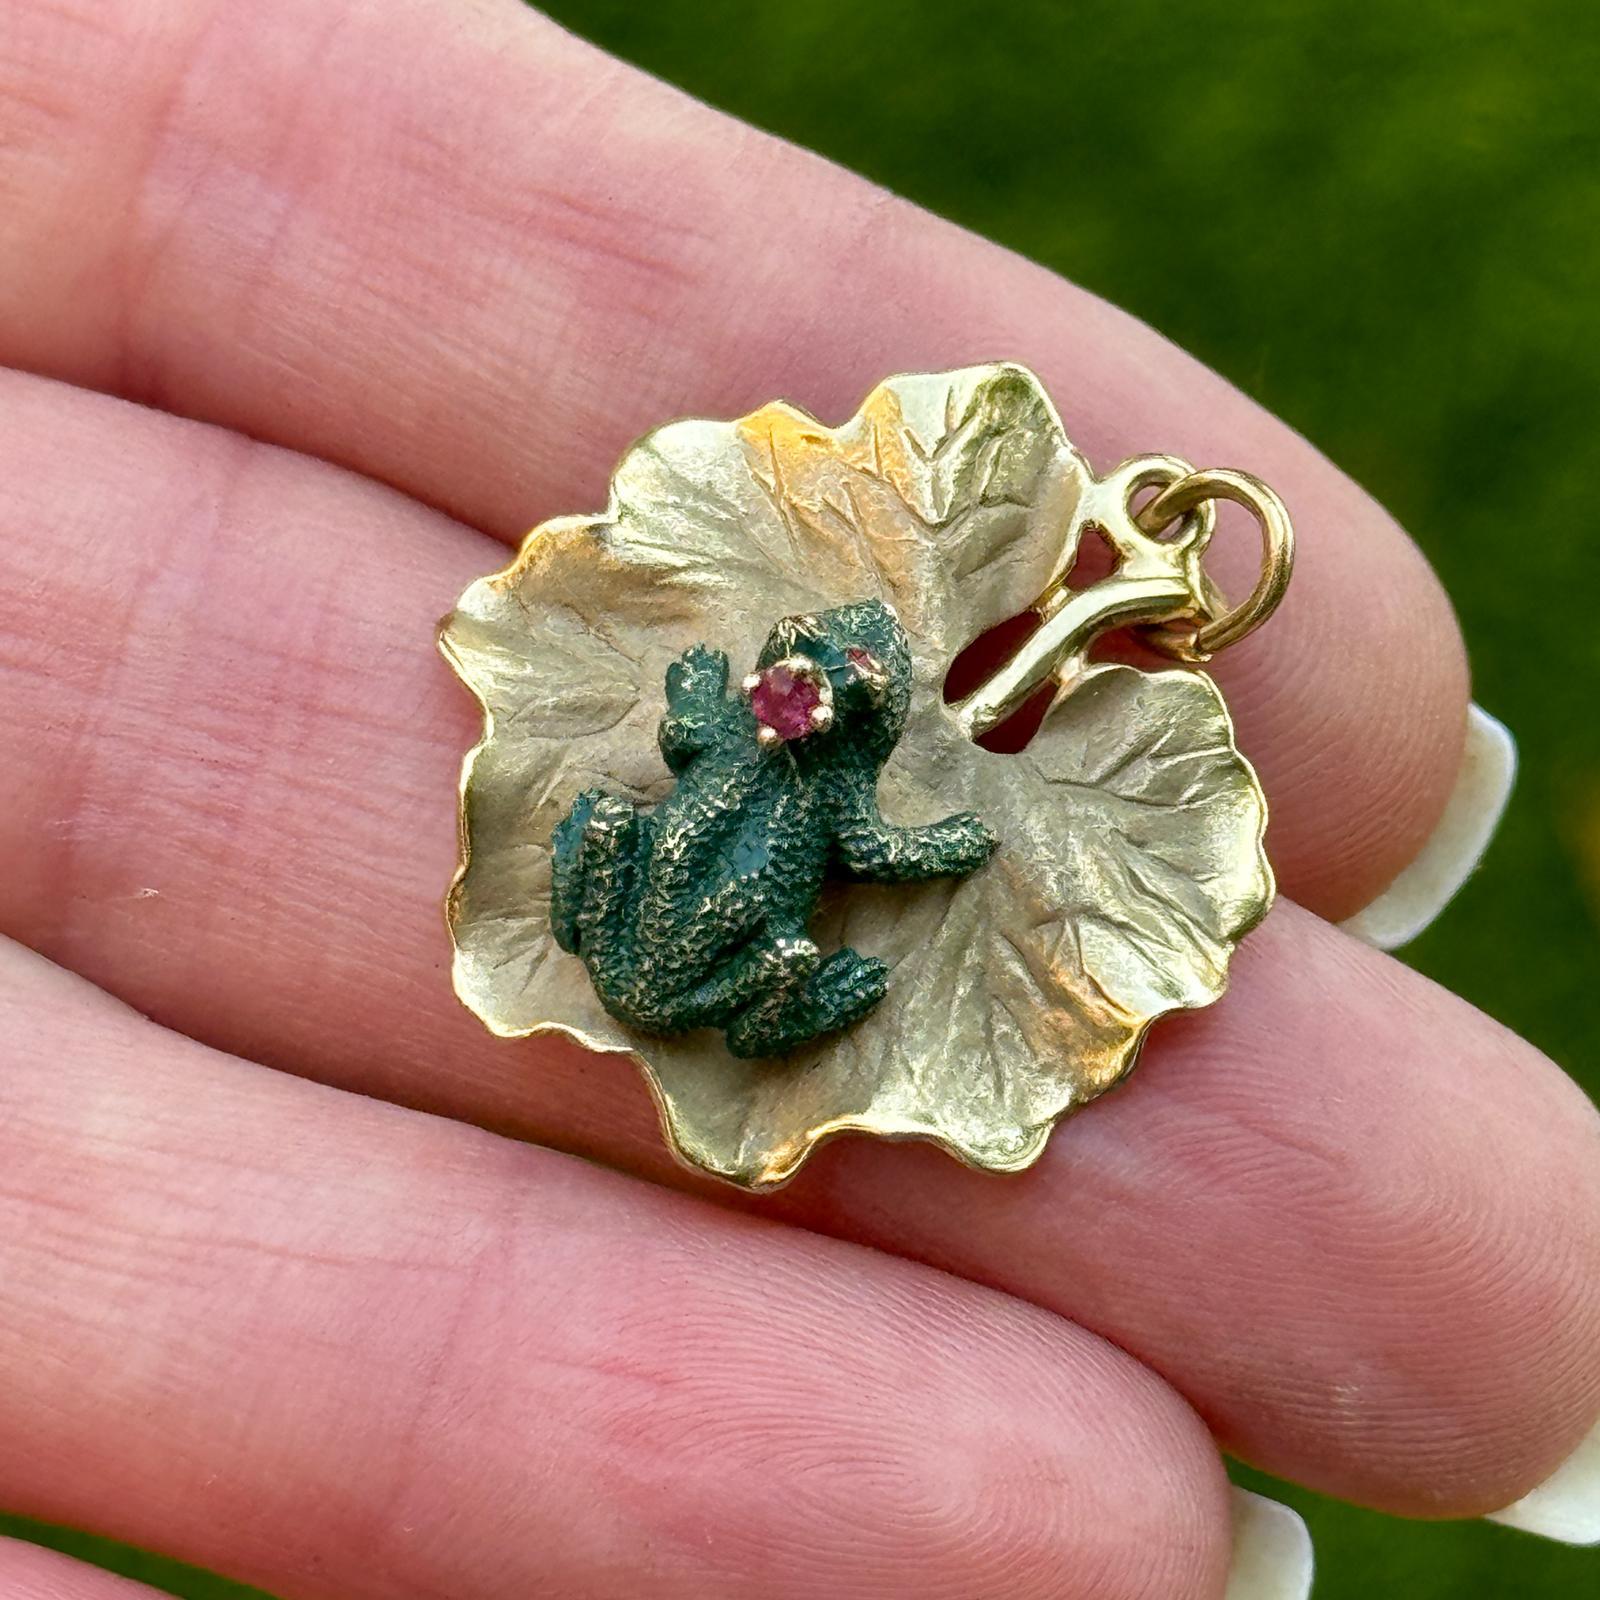 This charming and whimsical piece of jewelry features a 3-D green enamel frog with red eyes resting upon a lily pad all crafted from 14 karat yellow gold. The design captures the essense of nature with intricate detailing. This unique work of art